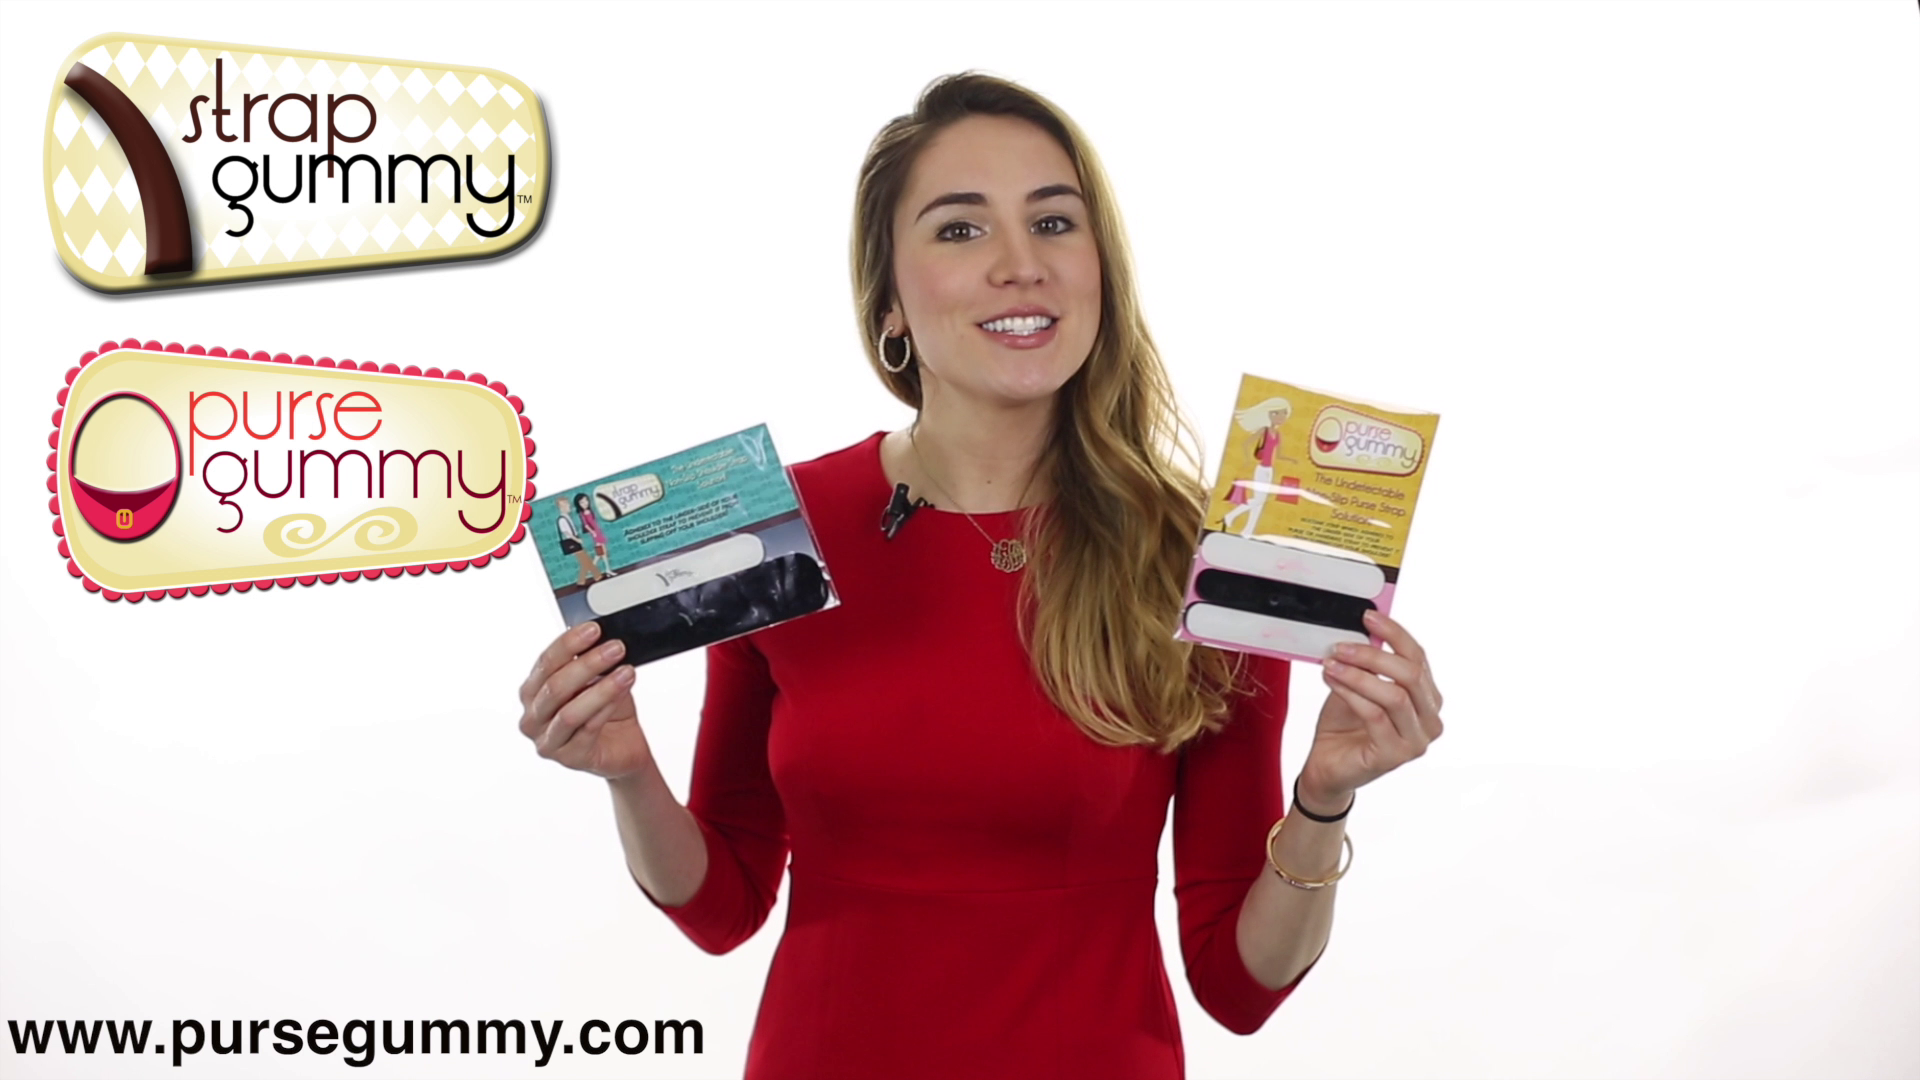 Load video: Purse Gummy and Strap Gummy products explained